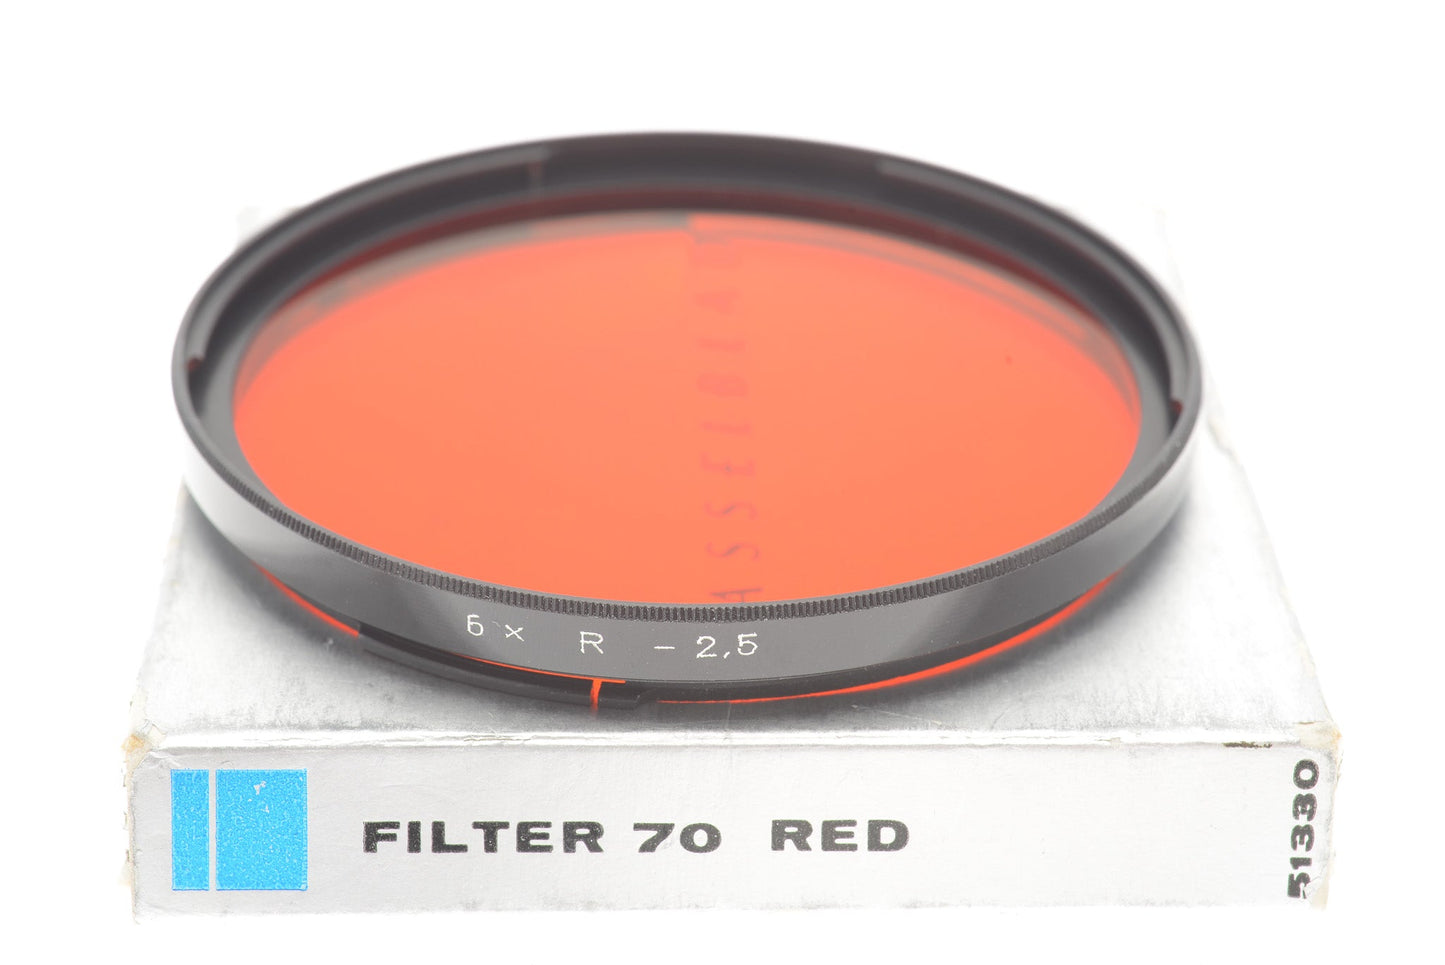 Hasselblad B70 Red Filter 6X R - 2.5 (51330) - Accessory